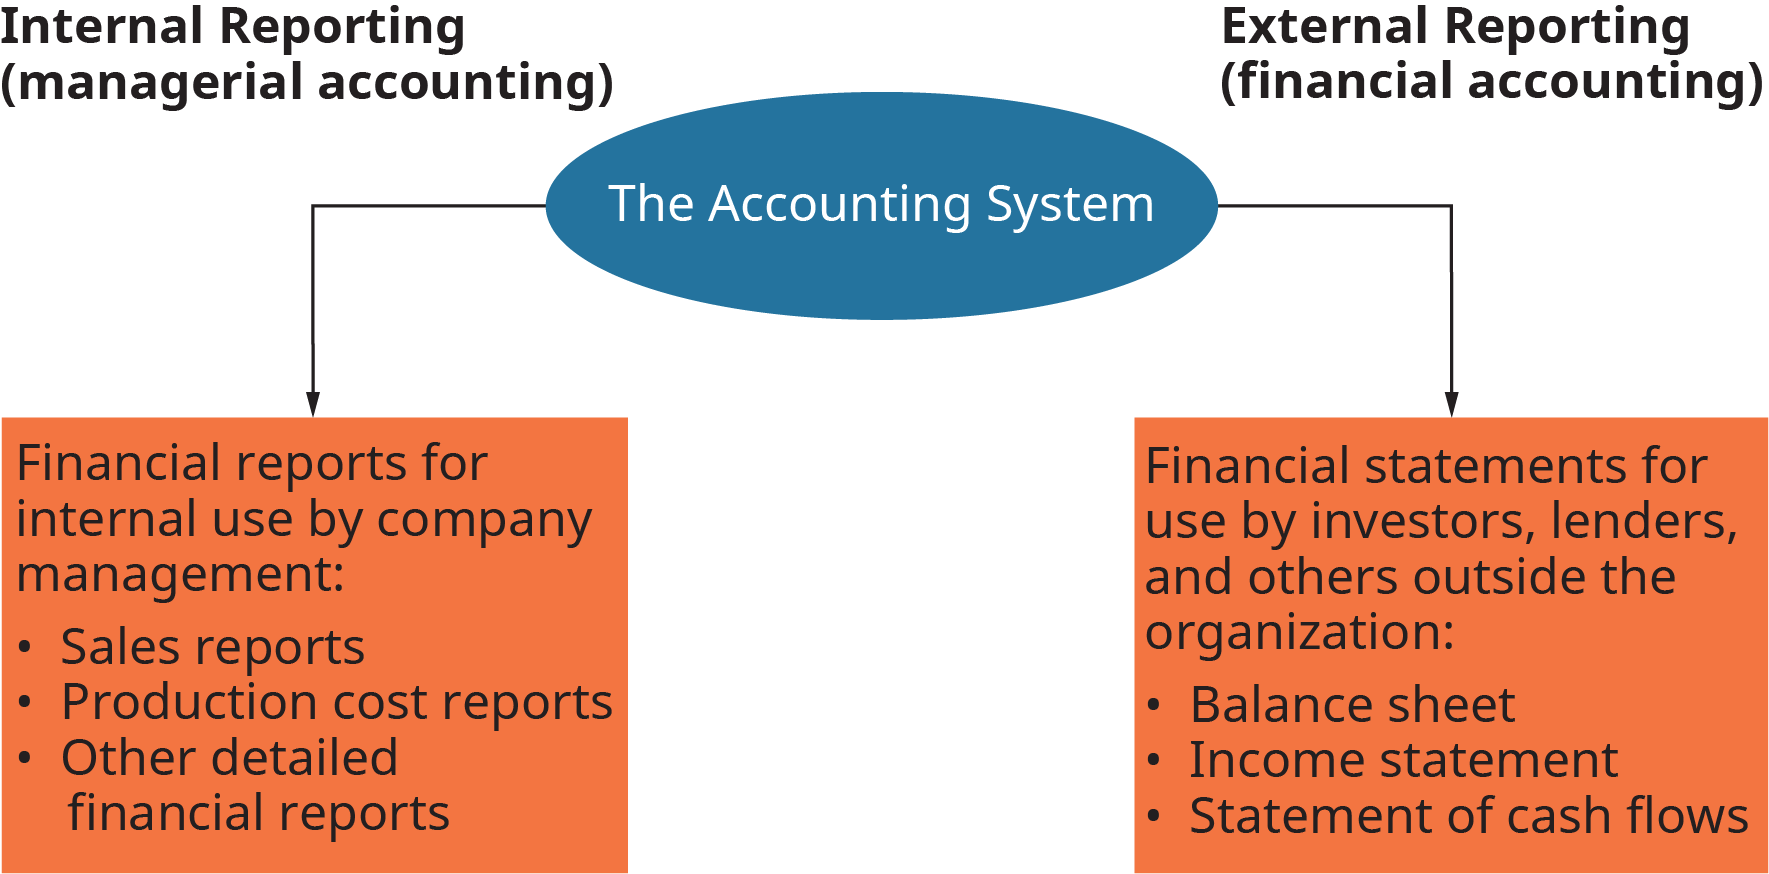 The diagram shows the accounting system at the center, and branching to the left and right. To the left is internal reporting, managerial accounting. To the right is external reporting, financial accounting. On the internal side, the diagram reads as follows. Financial reports for internal use by company management; sales reports, production cost reports, and other detailed financial reports. On the external reporting side, the diagram reads as follows. Financial statements for use by investors, lenders, and others outside the organization; balance sheet, income statement, and statement of cash flows.